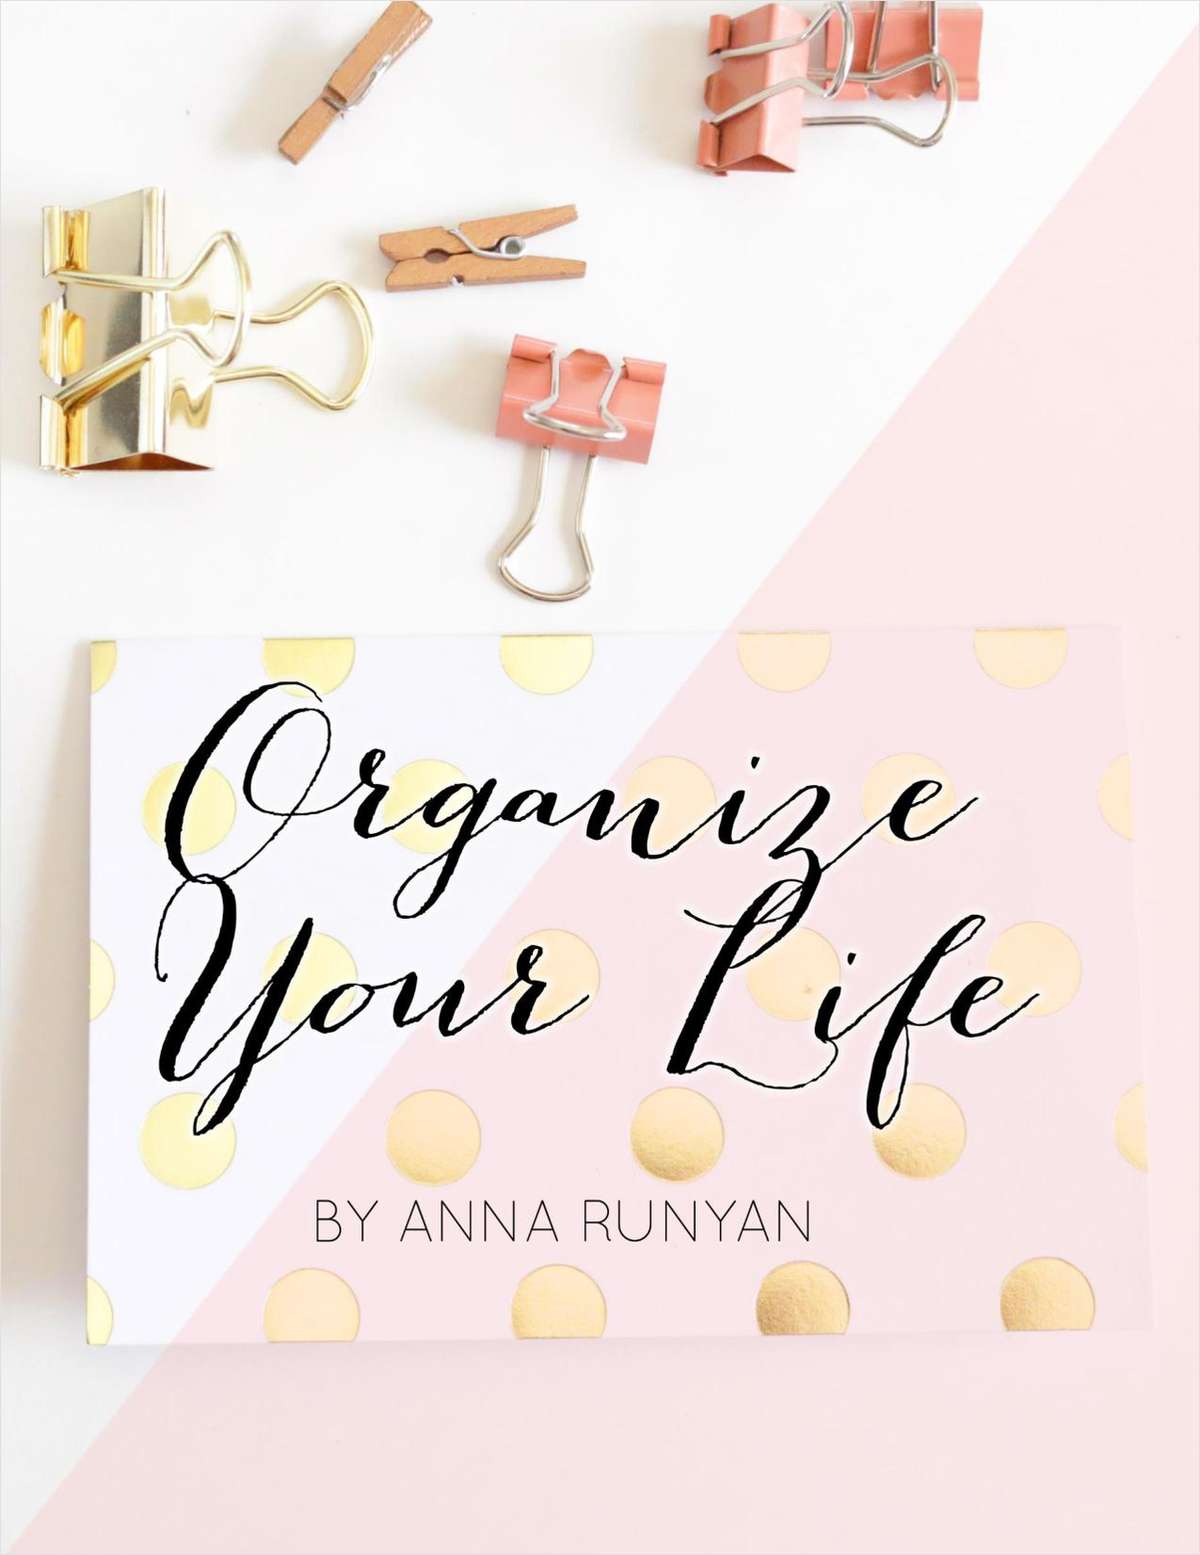 Organize Your Life: Top 10 Processes You Need to Organize Your Life